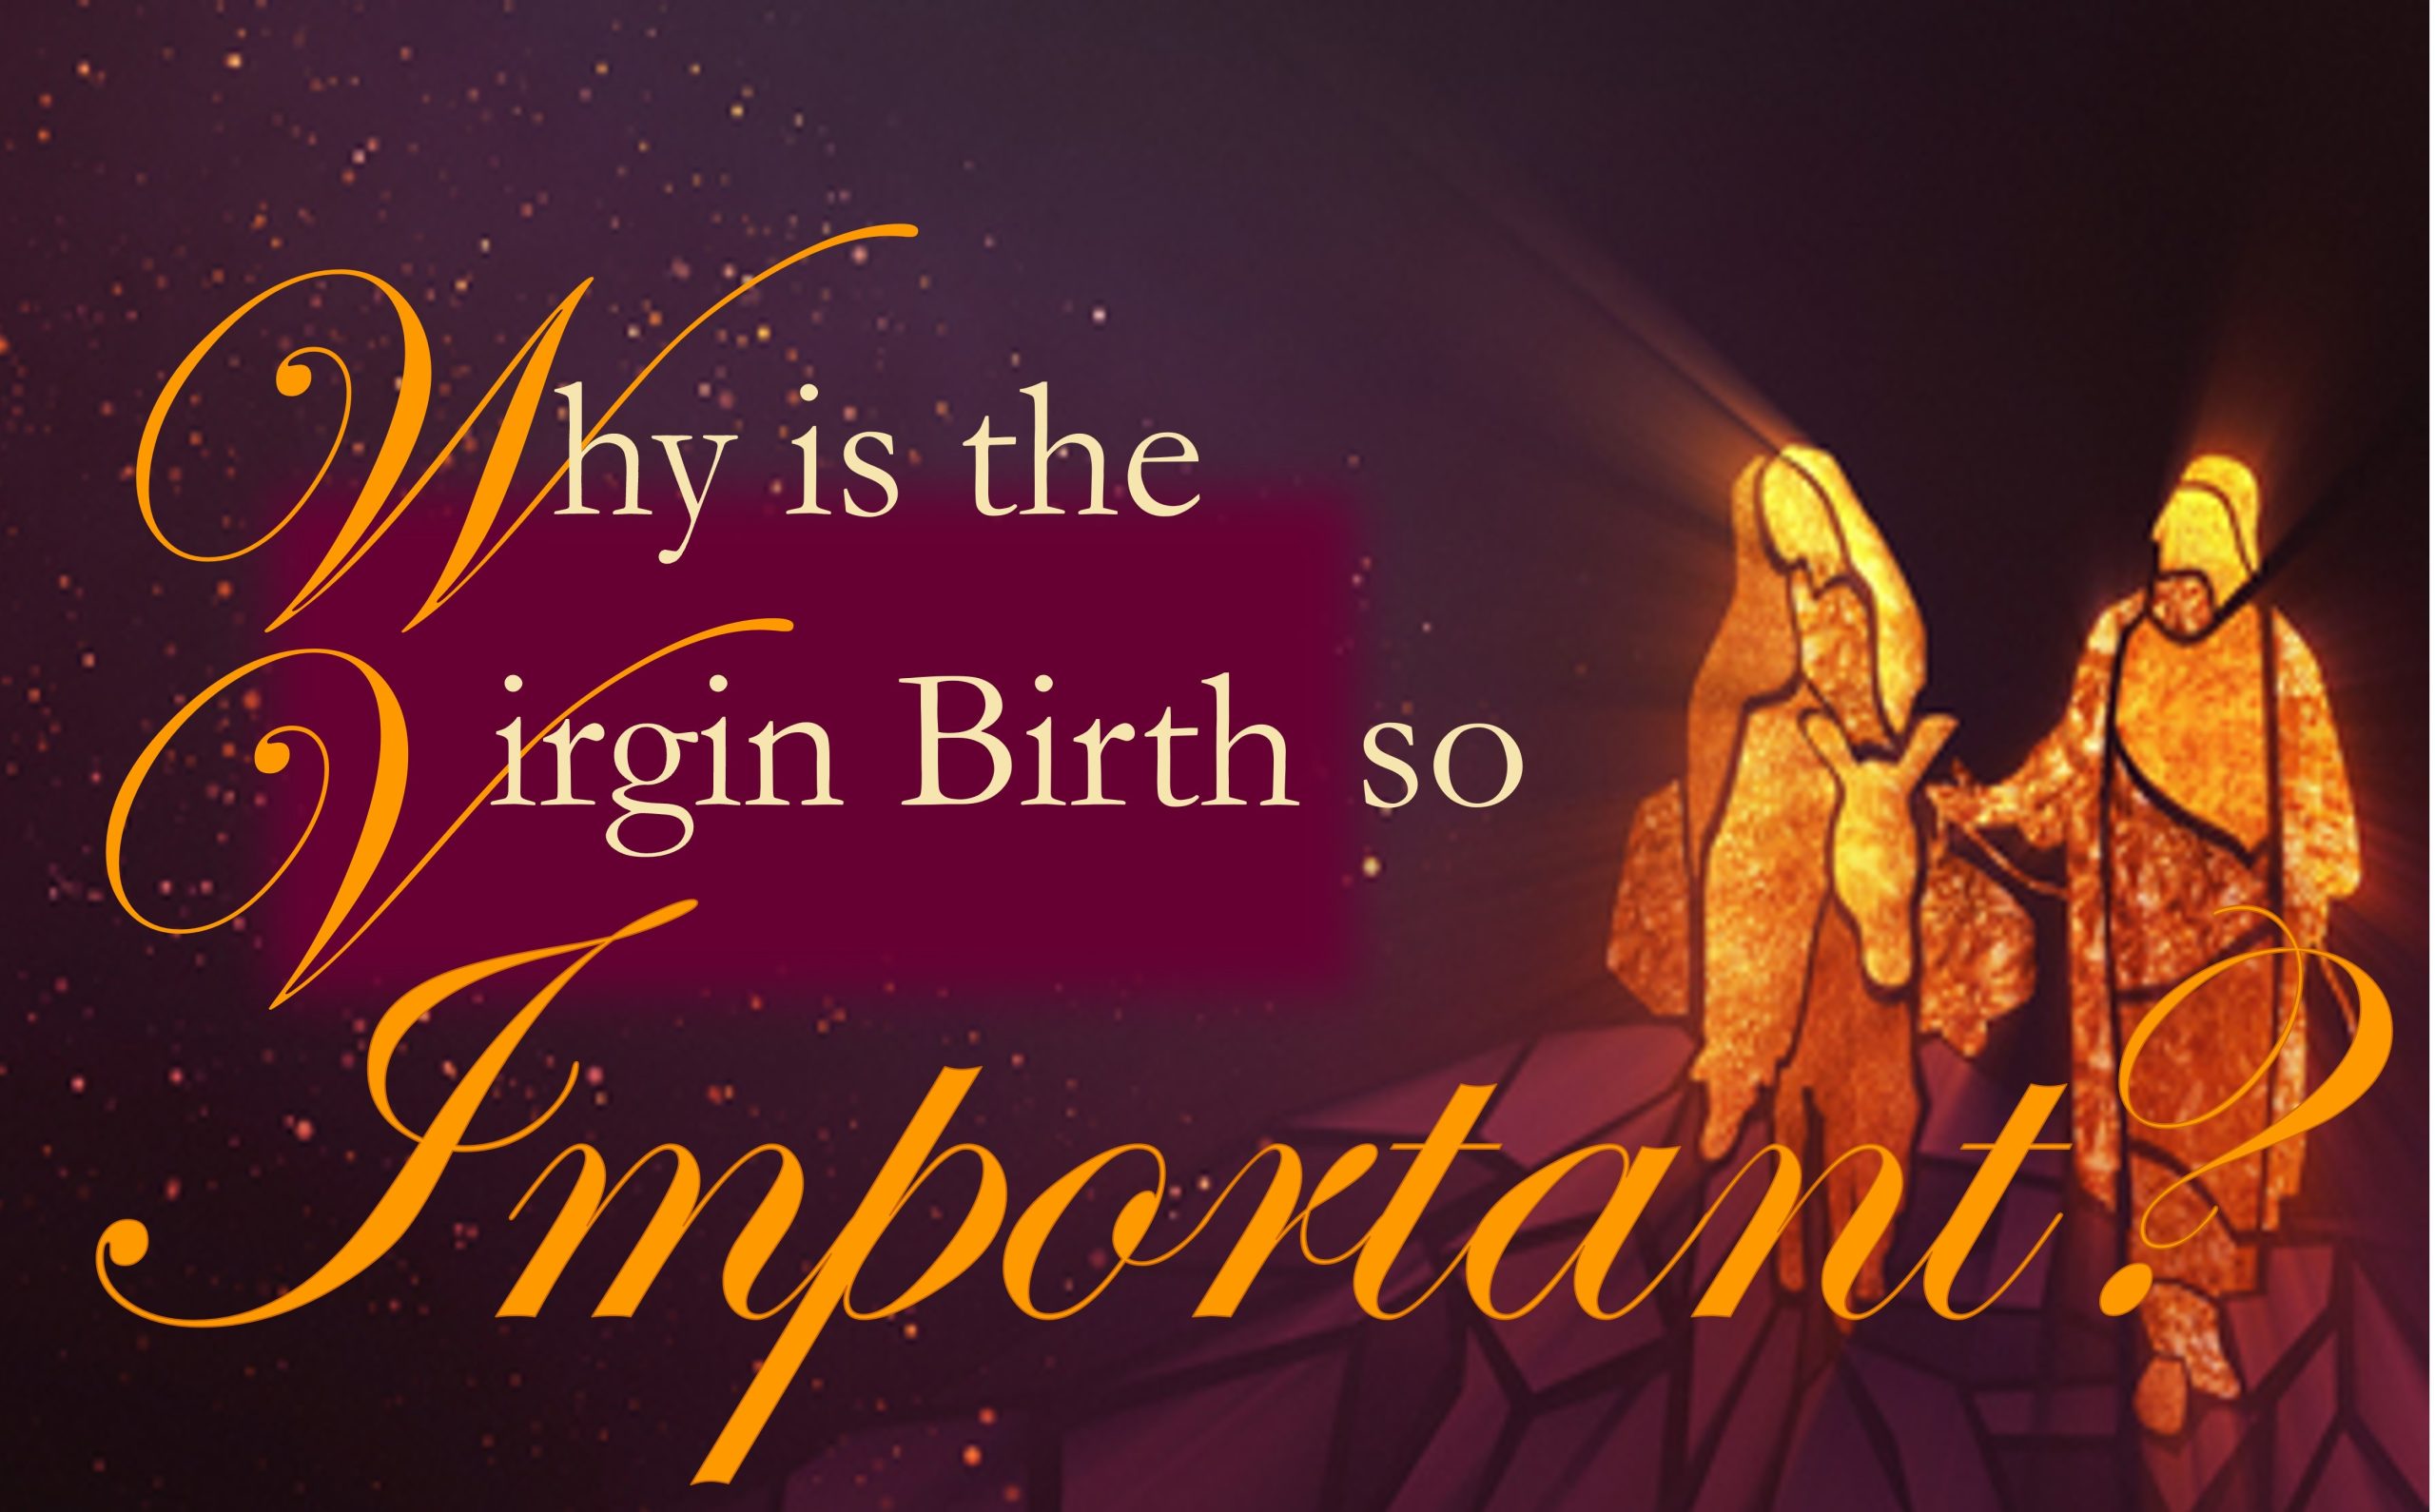 You are currently viewing Why is the Virgin Birth So IMPORTANT? – December 24th